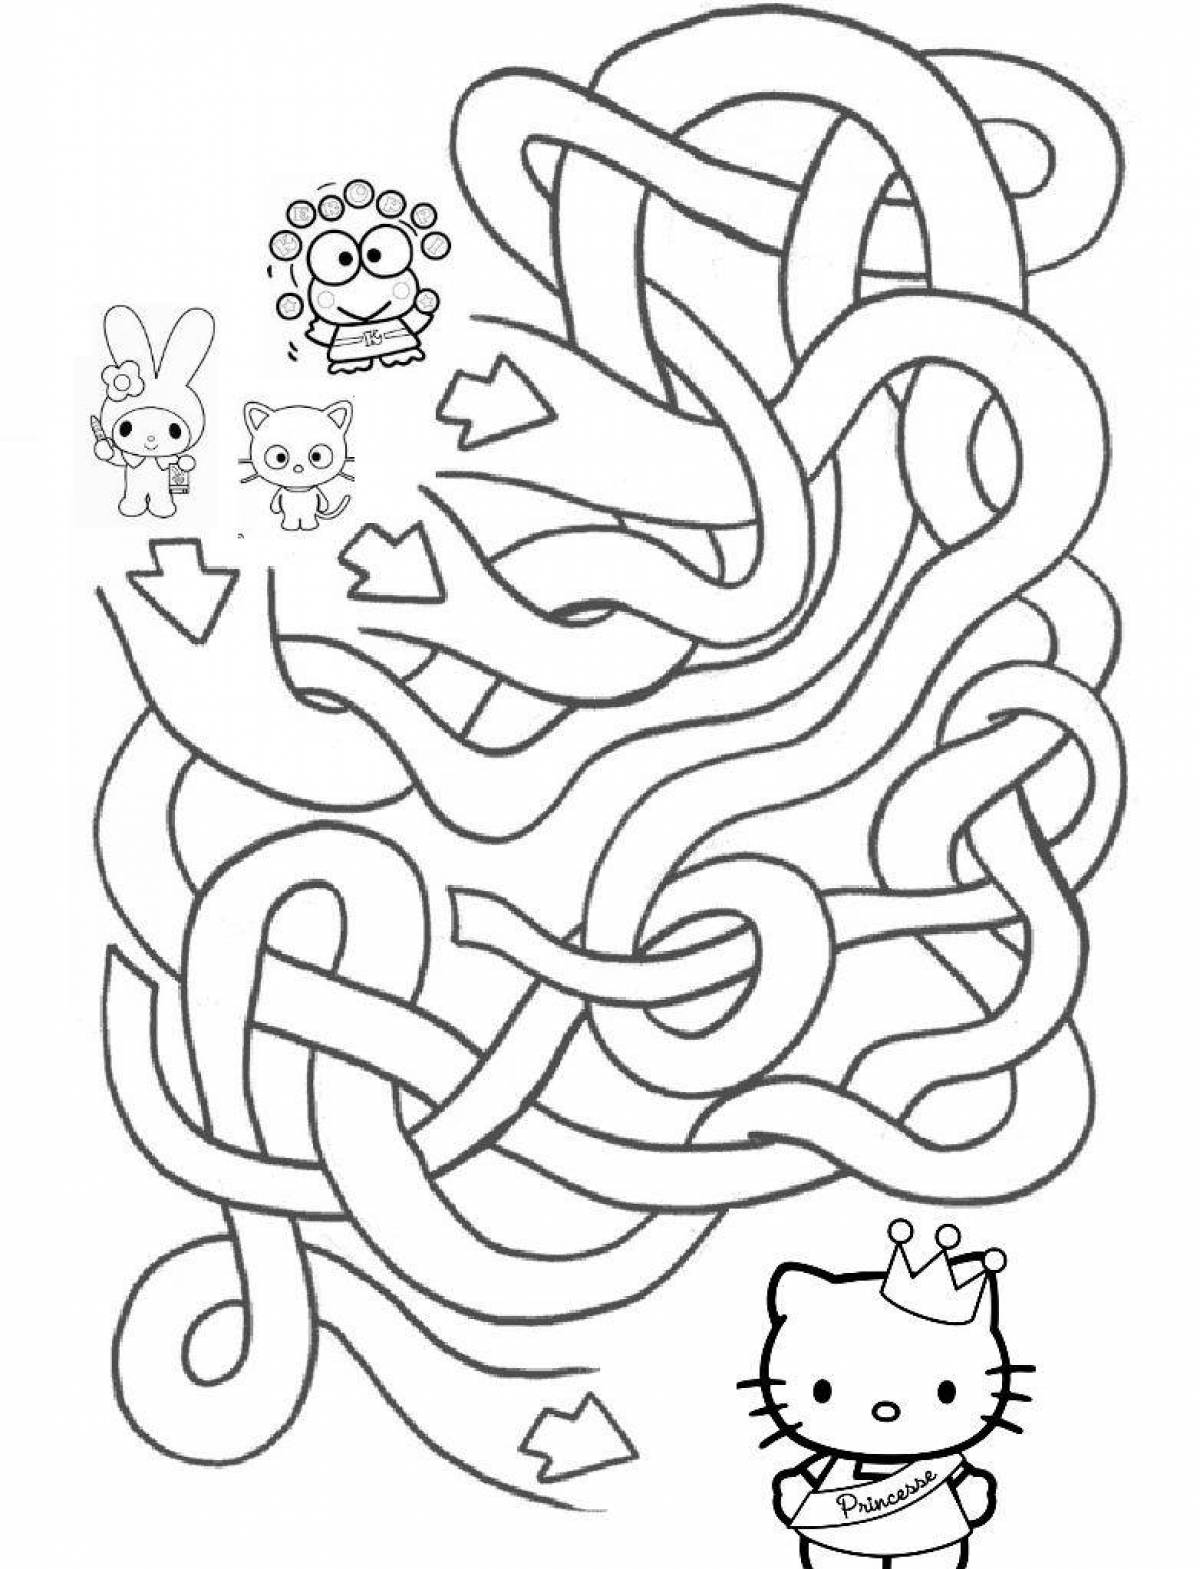 Playful maze coloring book for 3-4 year olds